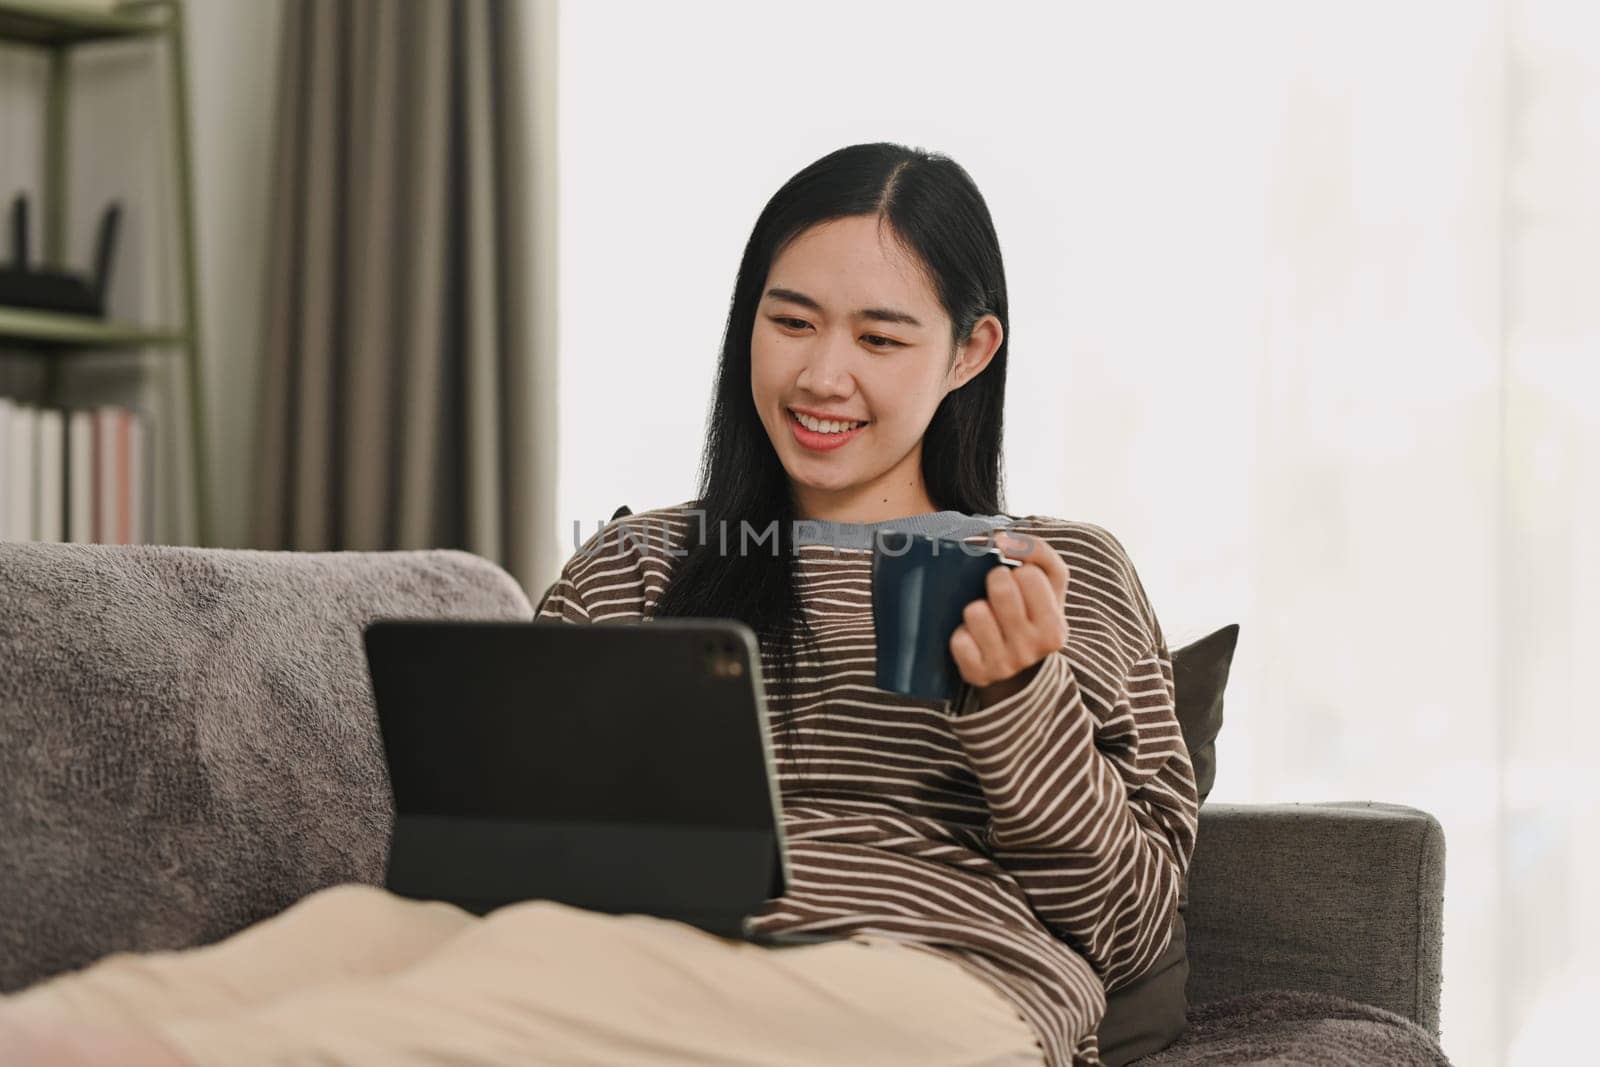 Smiling young woman drinking coffee and working on digital tablet at home.